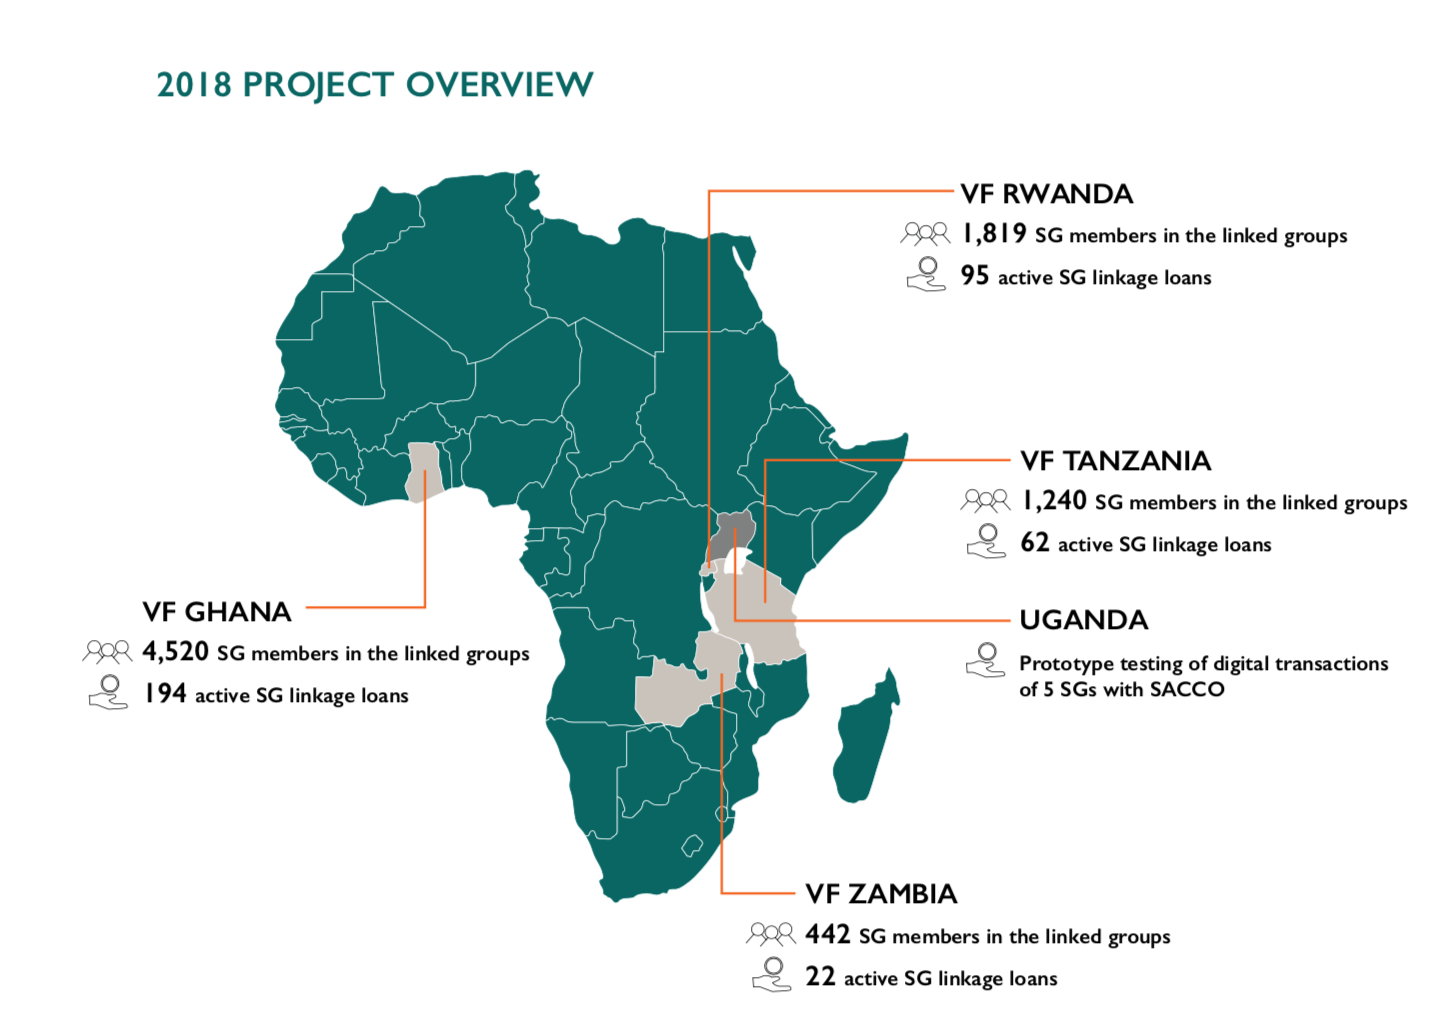 2018 Project overview map